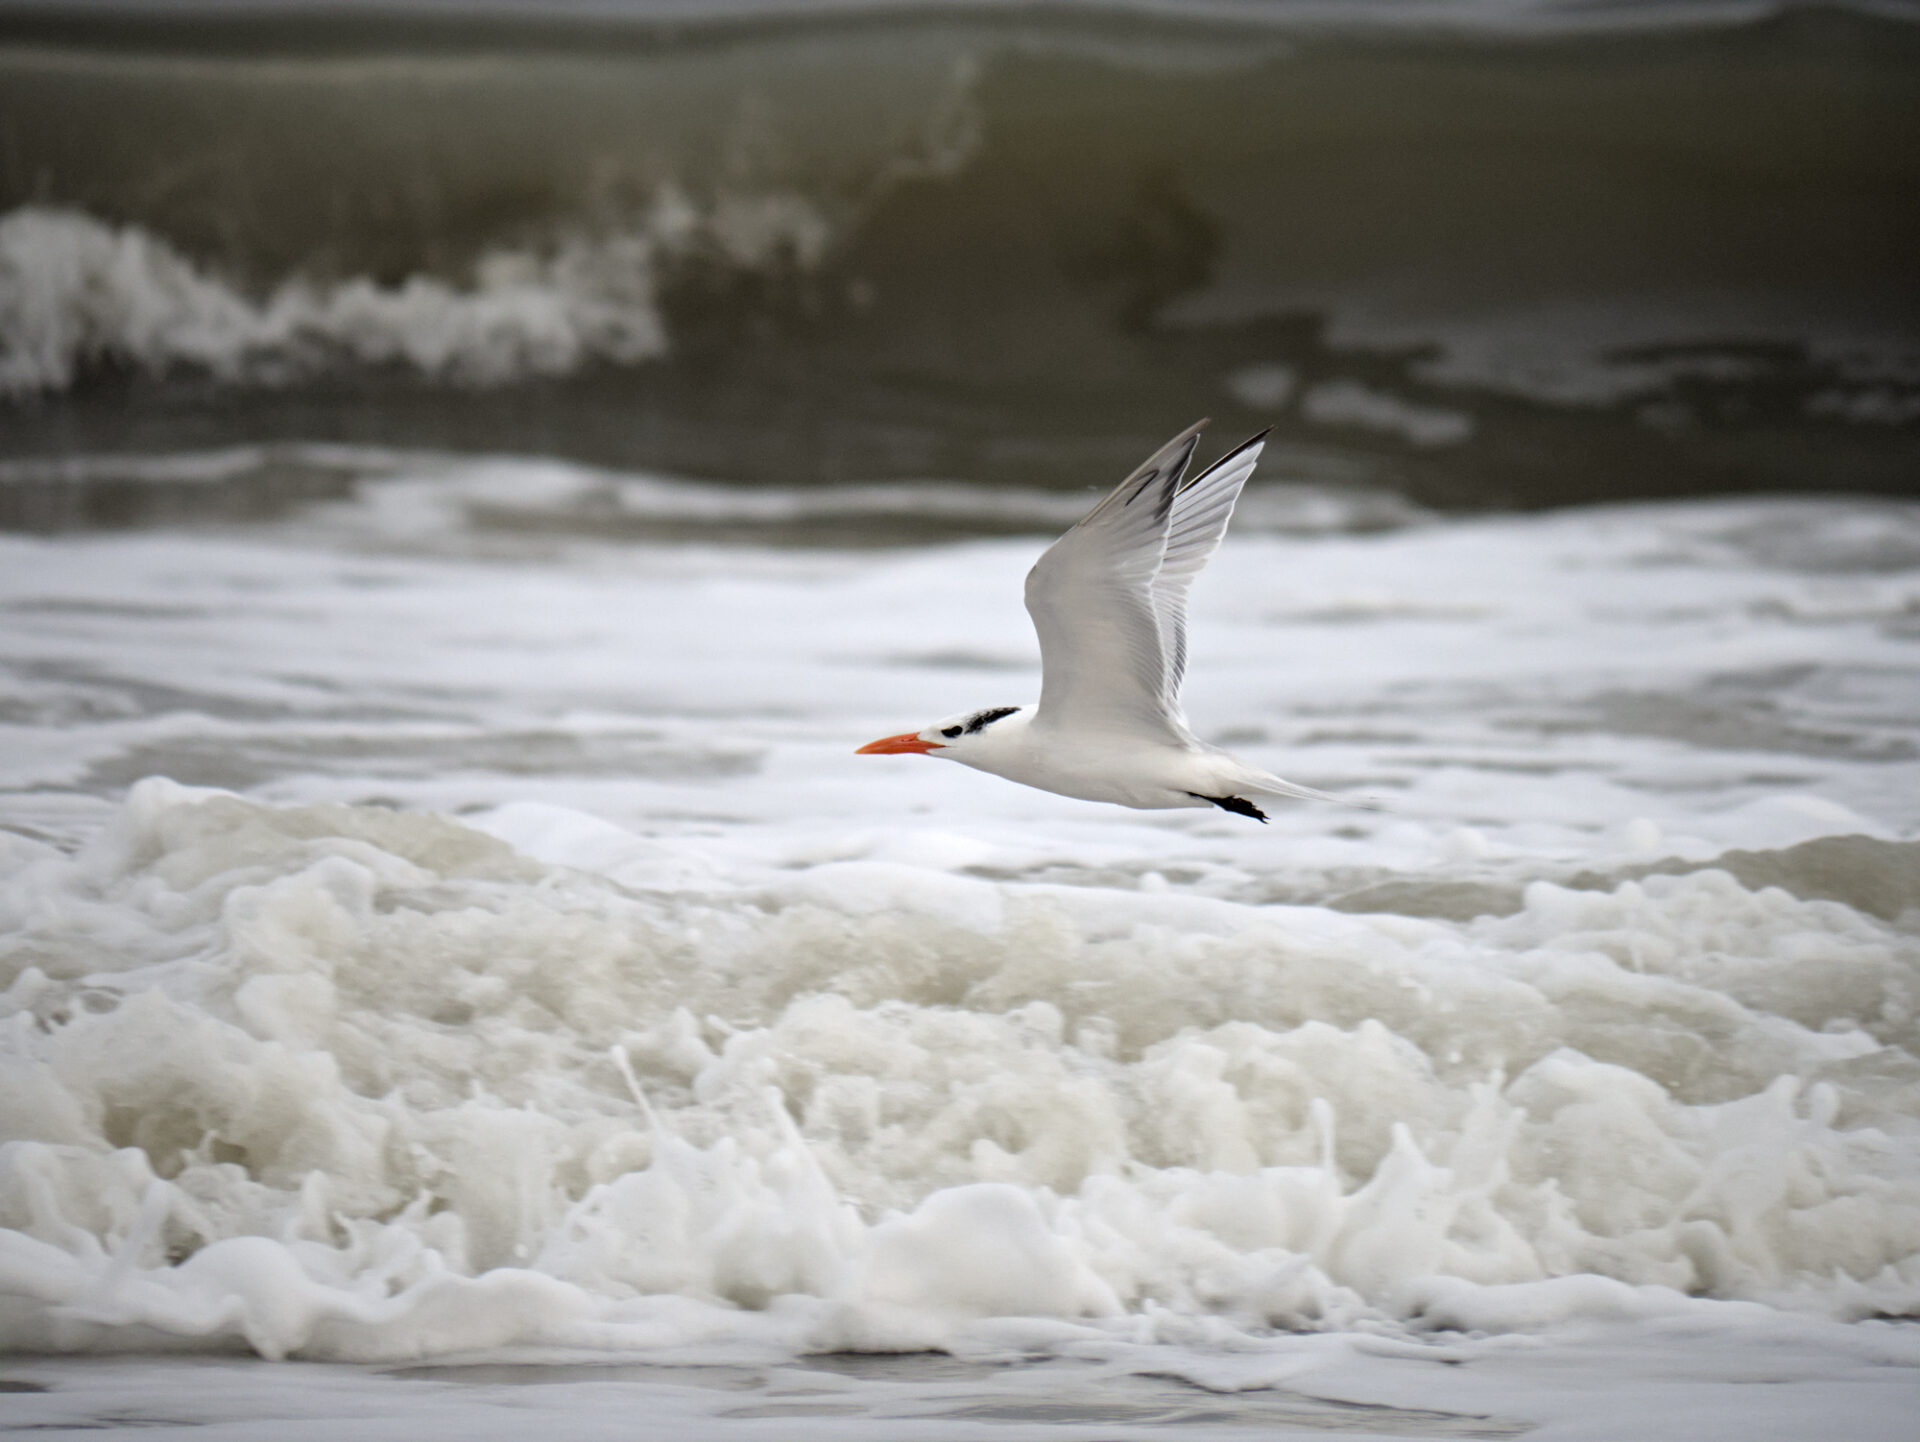 a royal tern in flight, waves crashing in the background